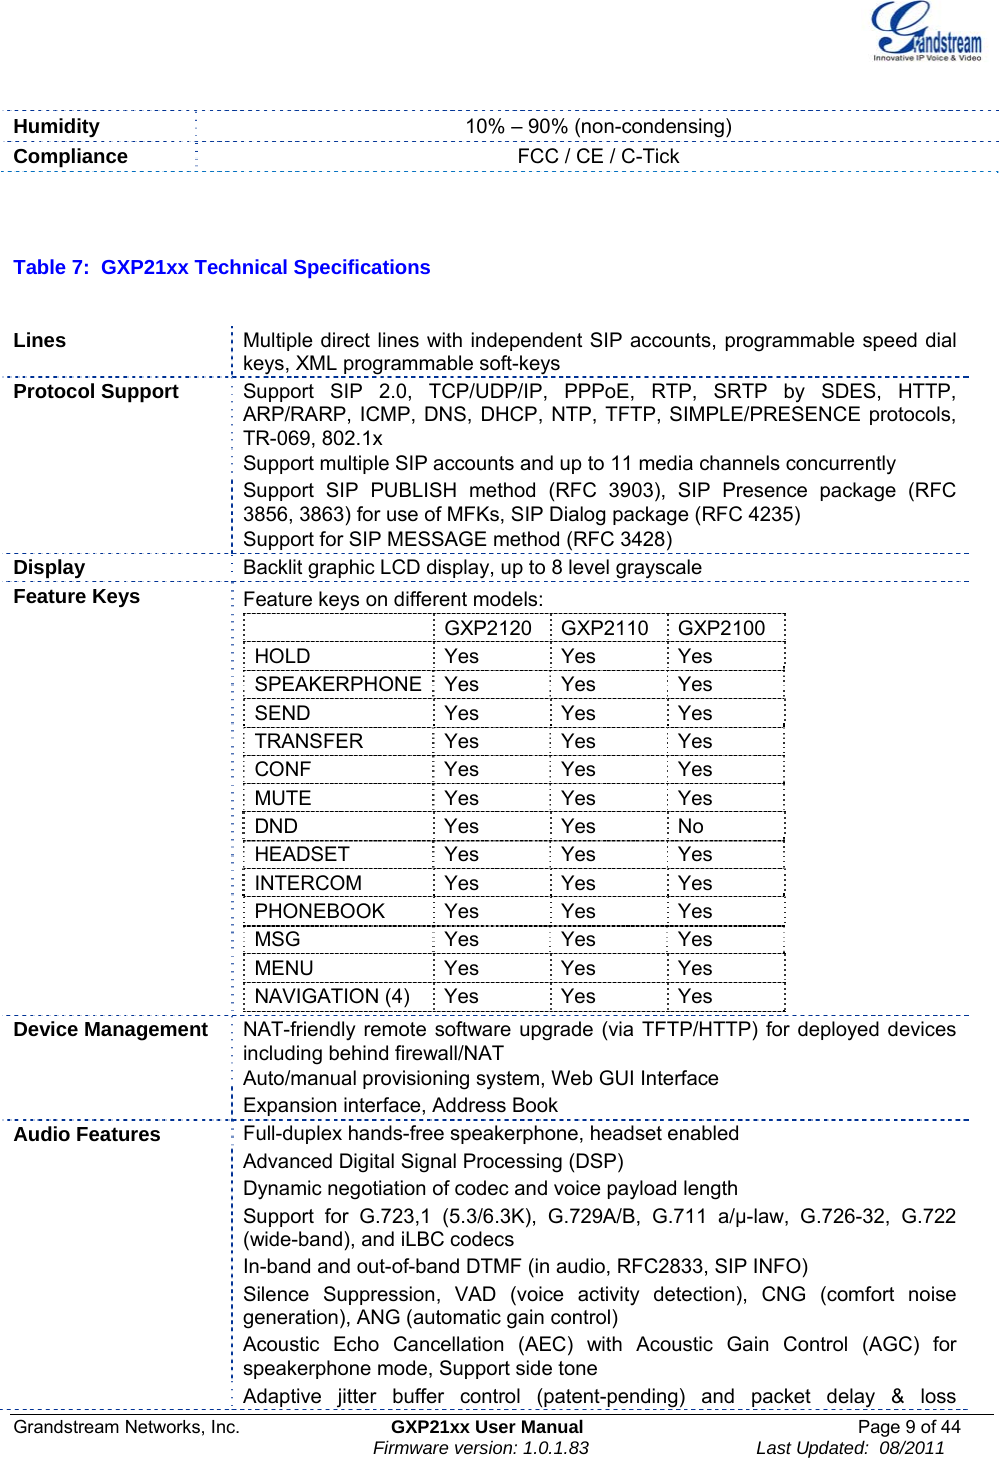  Grandstream Networks, Inc.  GXP21xx User Manual  Page 9 of 44                                                                Firmware version: 1.0.1.83                                 Last Updated:  08/2011  Humidity  10% – 90% (non-condensing) Compliance  FCC / CE / C-Tick   Table 7:  GXP21xx Technical Specifications  Lines   Multiple direct lines with independent SIP accounts, programmable speed dial keys, XML programmable soft-keys Protocol Support  Support SIP 2.0, TCP/UDP/IP, PPPoE, RTP, SRTP by SDES, HTTP, ARP/RARP, ICMP, DNS, DHCP, NTP, TFTP, SIMPLE/PRESENCE protocols, TR-069, 802.1x Support multiple SIP accounts and up to 11 media channels concurrently  Support SIP PUBLISH method (RFC 3903), SIP Presence package (RFC 3856, 3863) for use of MFKs, SIP Dialog package (RFC 4235)  Support for SIP MESSAGE method (RFC 3428) Display   Backlit graphic LCD display, up to 8 level grayscale Feature Keys                  Feature keys on different models:  GXP2120 GXP2110 GXP2100 HOLD  Yes Yes Yes SPEAKERPHONE Yes Yes Yes SEND  Yes Yes Yes TRANSFER Yes Yes Yes CONF  Yes Yes Yes MUTE  Yes Yes Yes DND  Yes Yes No HEADSET  Yes Yes Yes INTERCOM Yes Yes Yes PHONEBOOK Yes Yes Yes MSG  Yes Yes Yes MENU   Yes Yes Yes NAVIGATION (4) Yes Yes Yes  Device Management  NAT-friendly remote software upgrade (via TFTP/HTTP) for deployed devices including behind firewall/NAT Auto/manual provisioning system, Web GUI Interface   Expansion interface, Address Book Audio Features   Full-duplex hands-free speakerphone, headset enabled  Advanced Digital Signal Processing (DSP)  Dynamic negotiation of codec and voice payload length  Support for G.723,1 (5.3/6.3K), G.729A/B, G.711 a/µ-law, G.726-32, G.722 (wide-band), and iLBC codecs  In-band and out-of-band DTMF (in audio, RFC2833, SIP INFO)  Silence Suppression, VAD (voice activity detection), CNG (comfort noise generation), ANG (automatic gain control)  Acoustic Echo Cancellation (AEC) with Acoustic Gain Control (AGC) for speakerphone mode, Support side tone  Adaptive jitter buffer control (patent-pending) and packet delay &amp; loss 